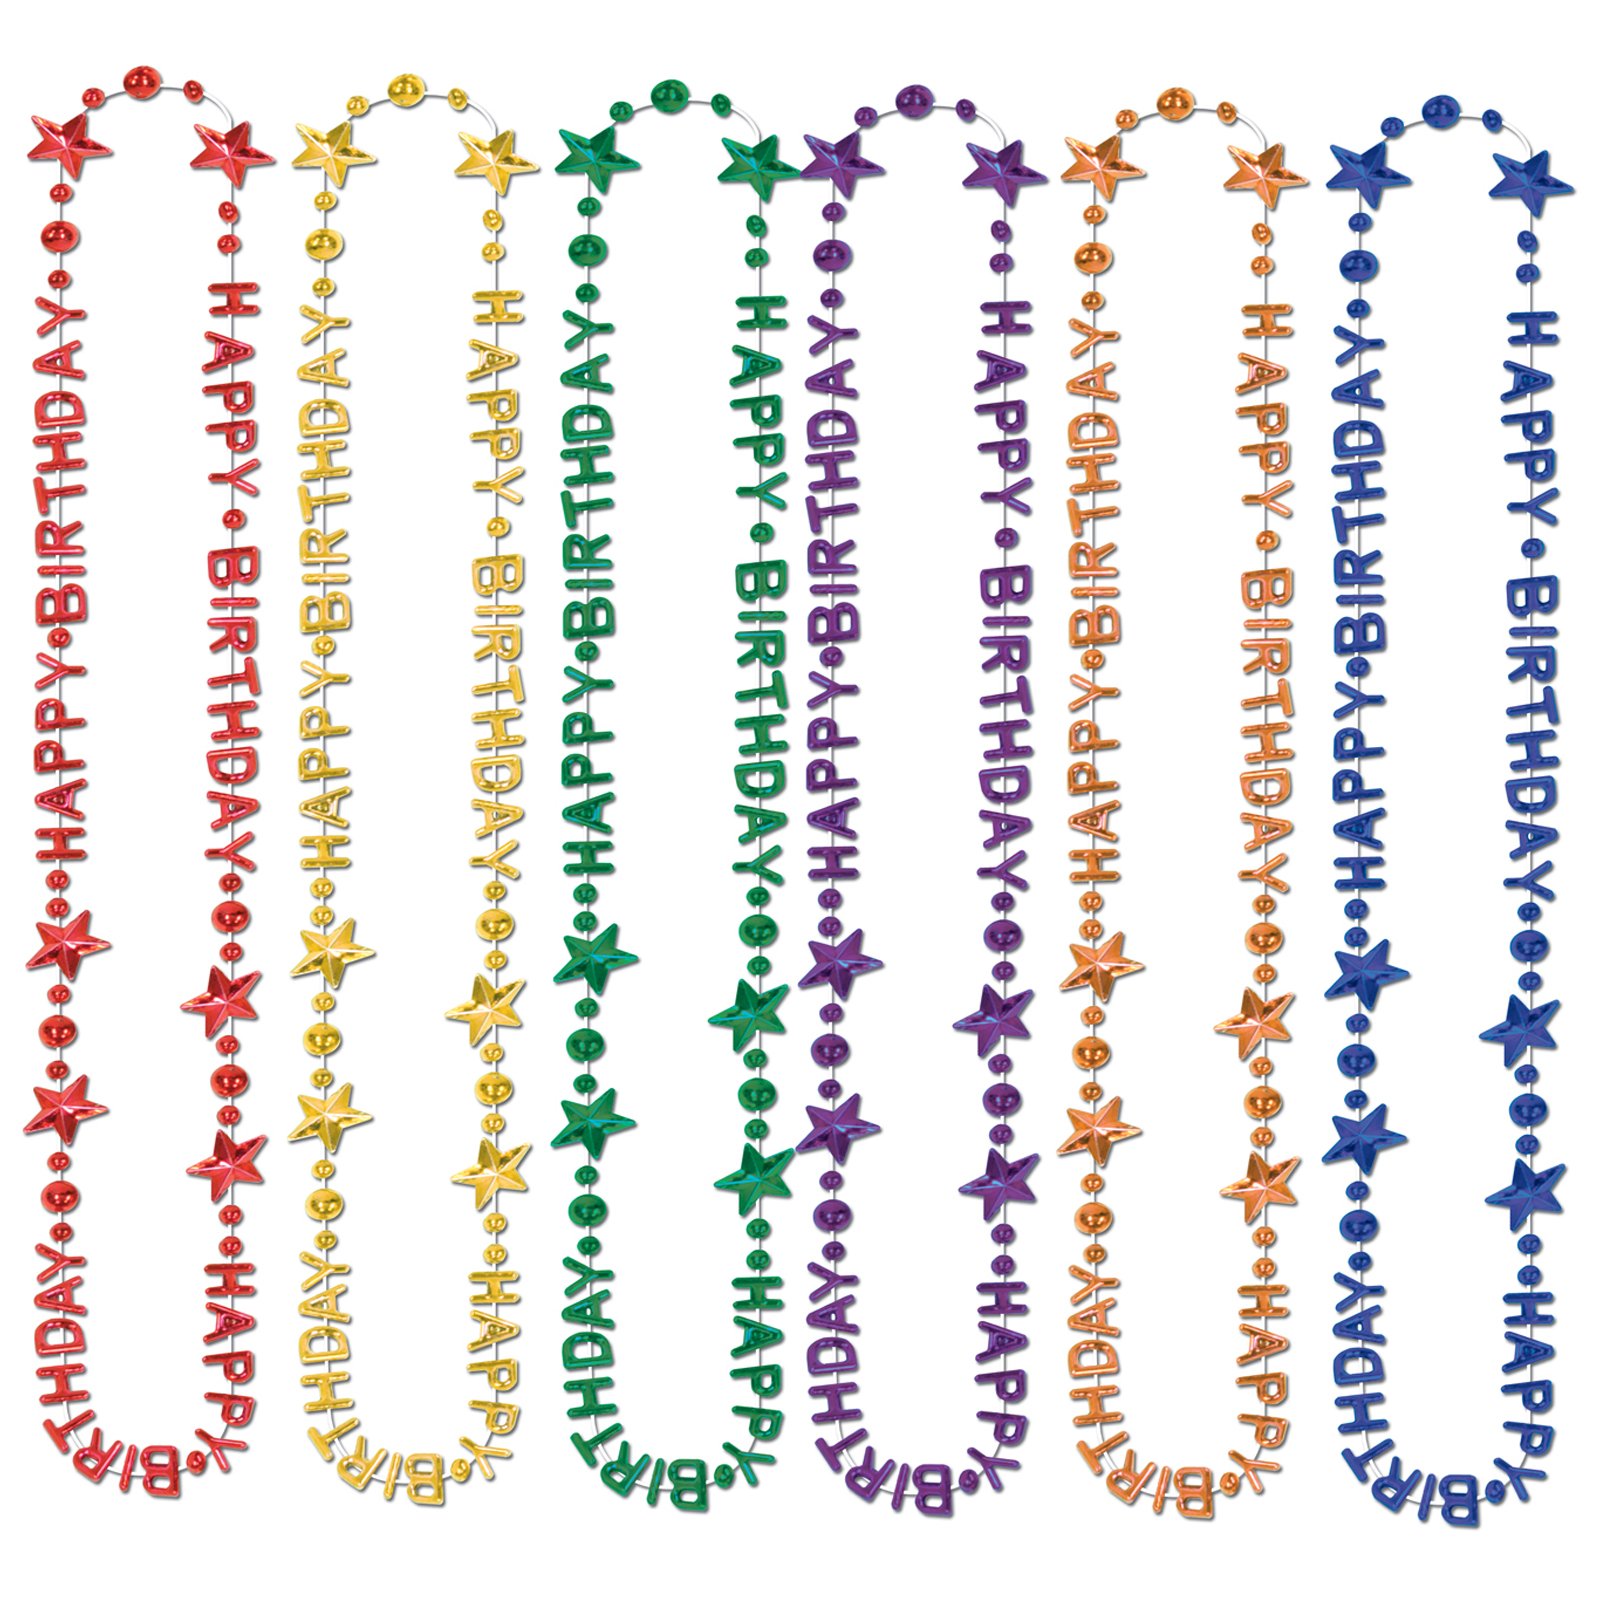 Beads-Of-Expression "Happy Birthday" Asst. (1 count) - Click Image to Close